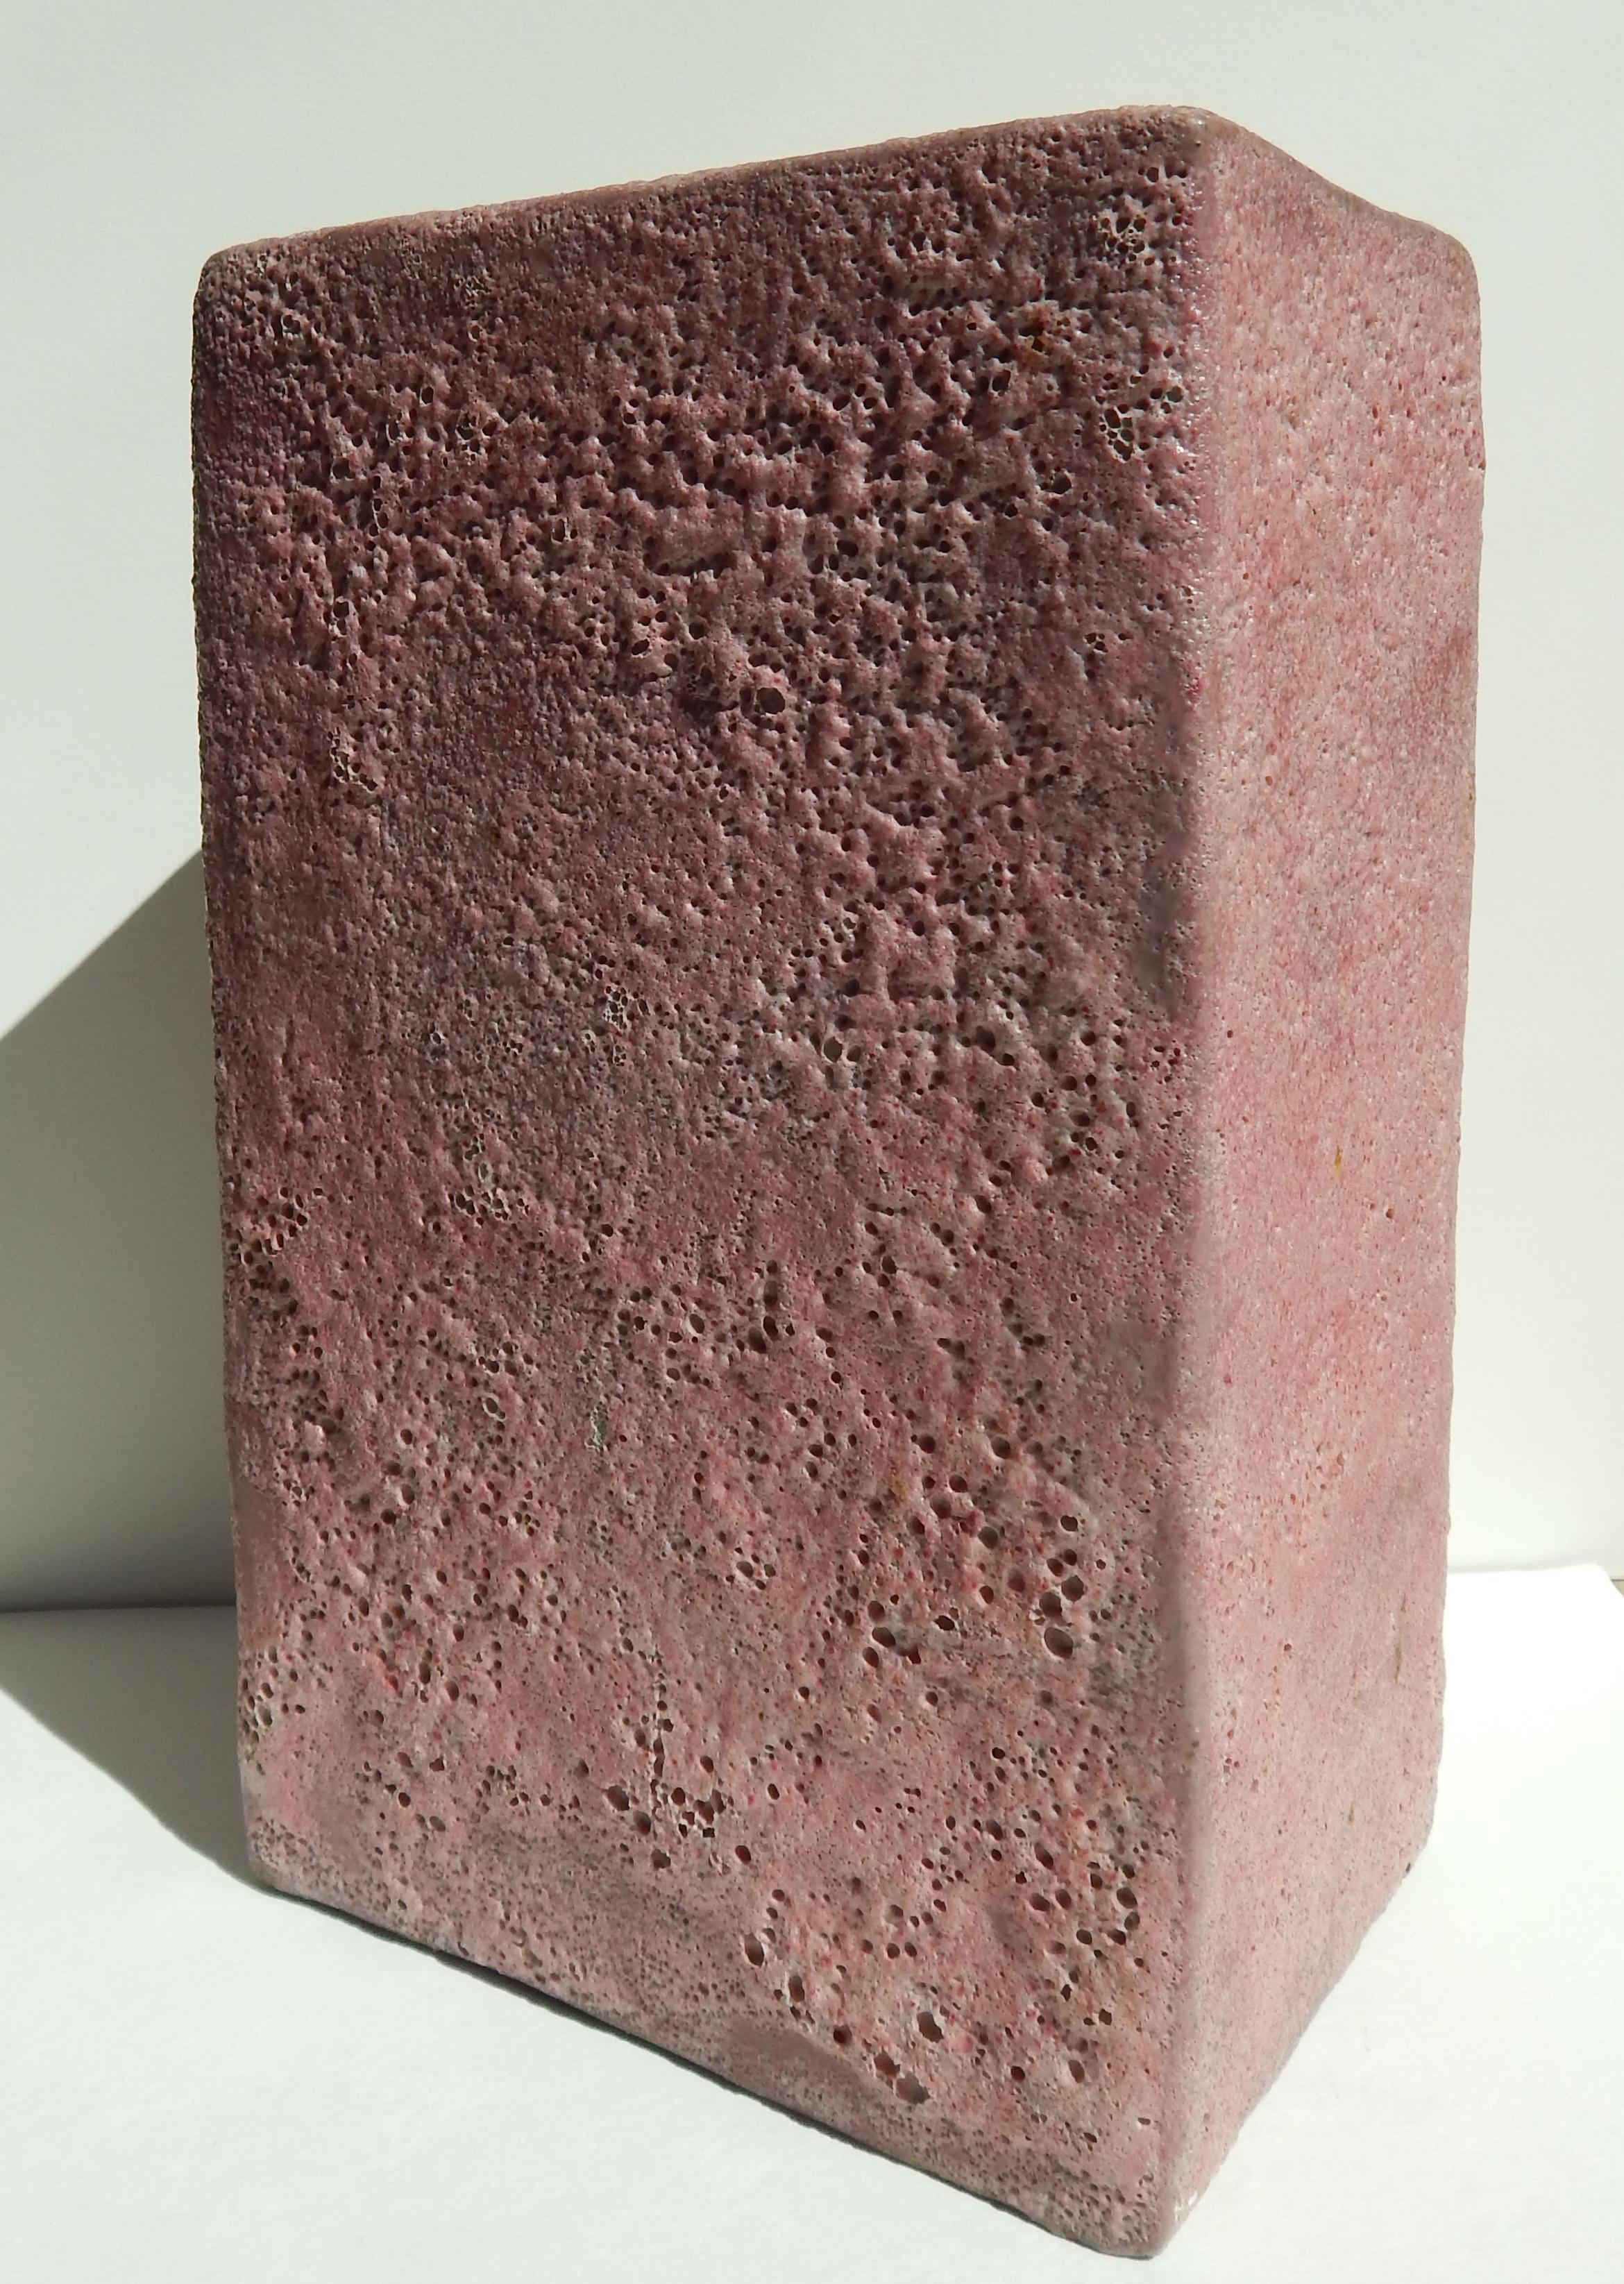 Tall pink volcanic glaze vase by California Art potter Beatrice Wood (1893-1998).
Signed on the bottom (twice) 